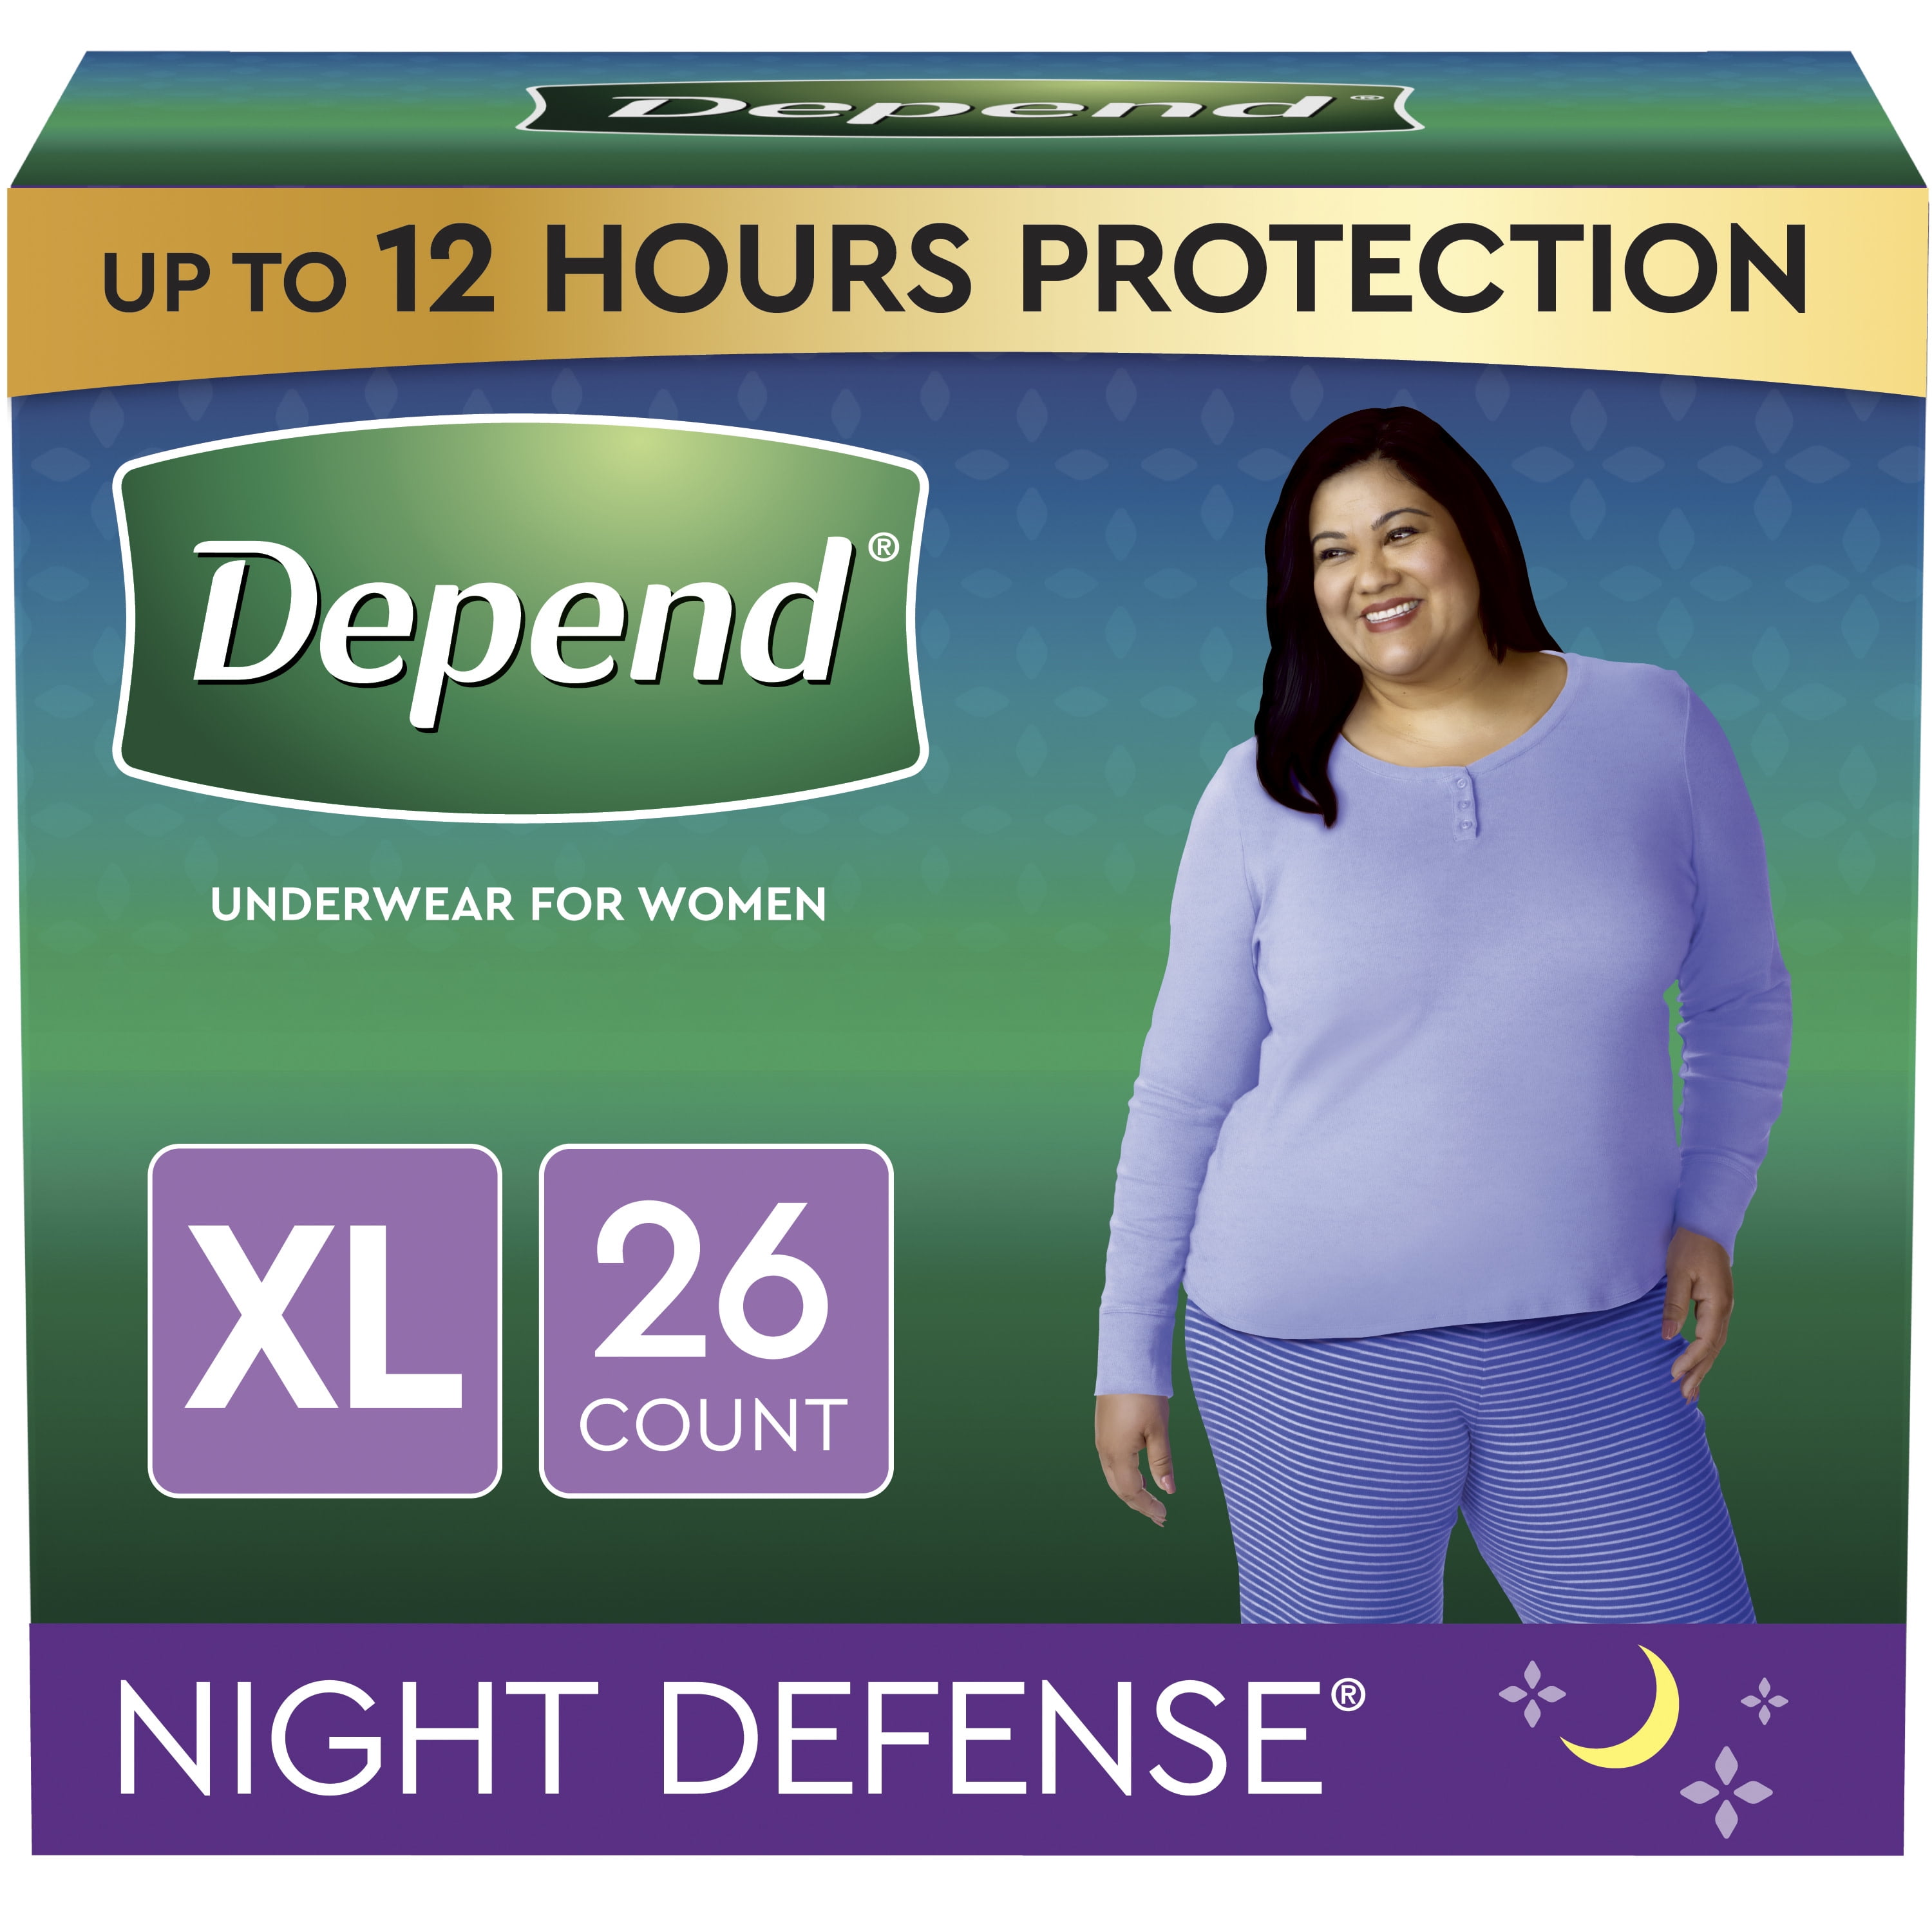 Depend - HOT BUY happening now at Costco! Our Protection Plus+® Underwear  for Women and our PROTECTION PLUS+® Underwear for Men are both $7.00 off  until Friday, August 26, 2022.